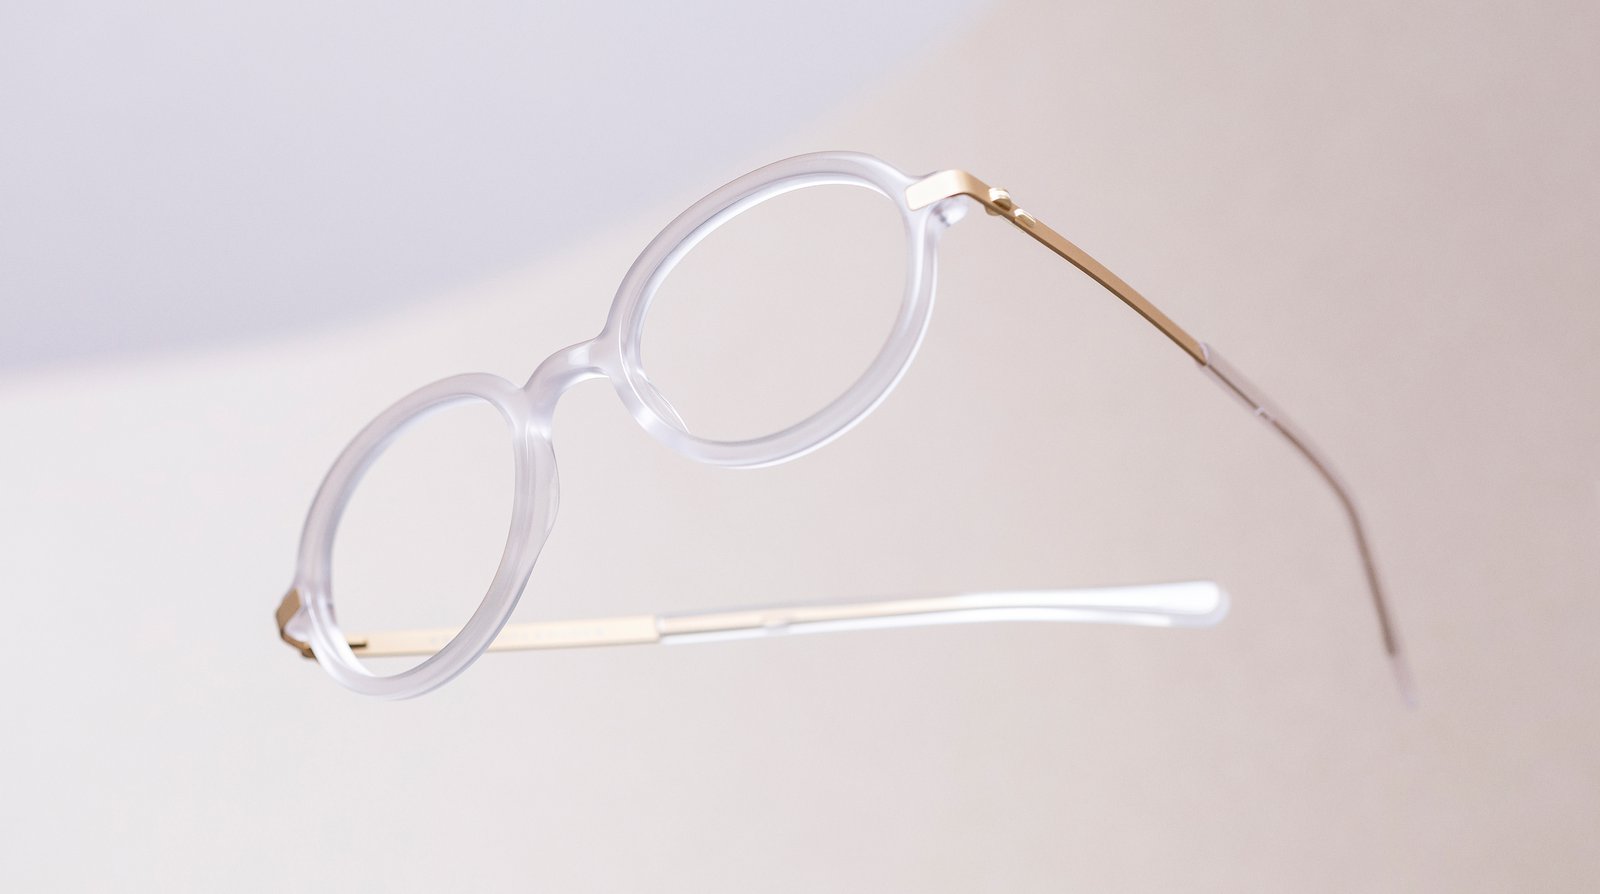 Eyeglasses by VAERK from article The Best Independent Eyewear Brands published by FAVR the premium eyewear finder.